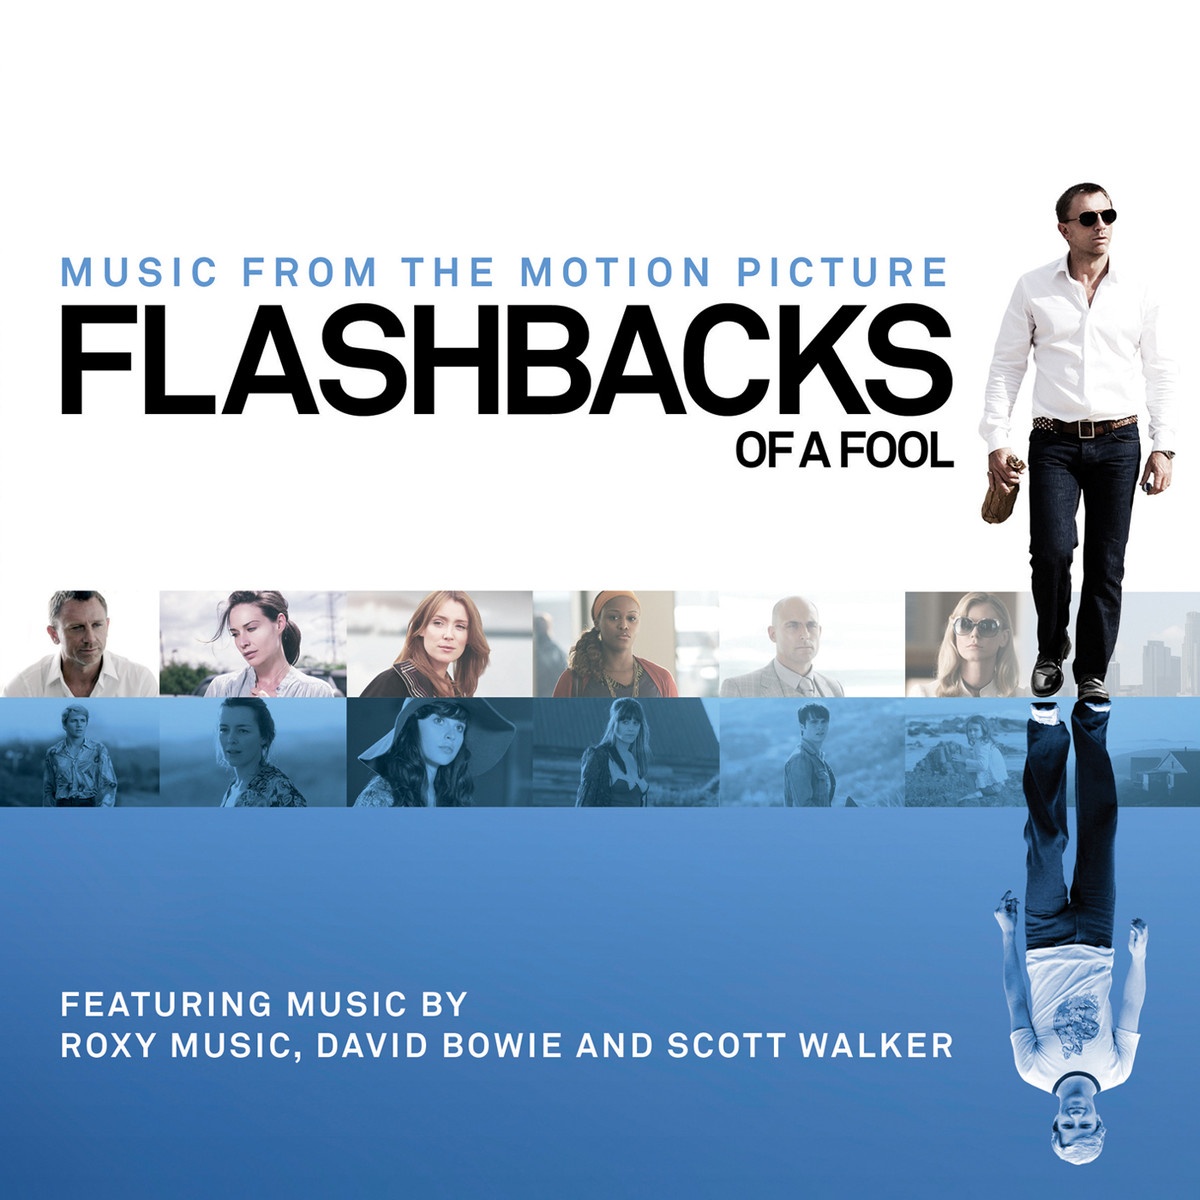 Flashbacks Of A Fool (Music from the Motion Picture)